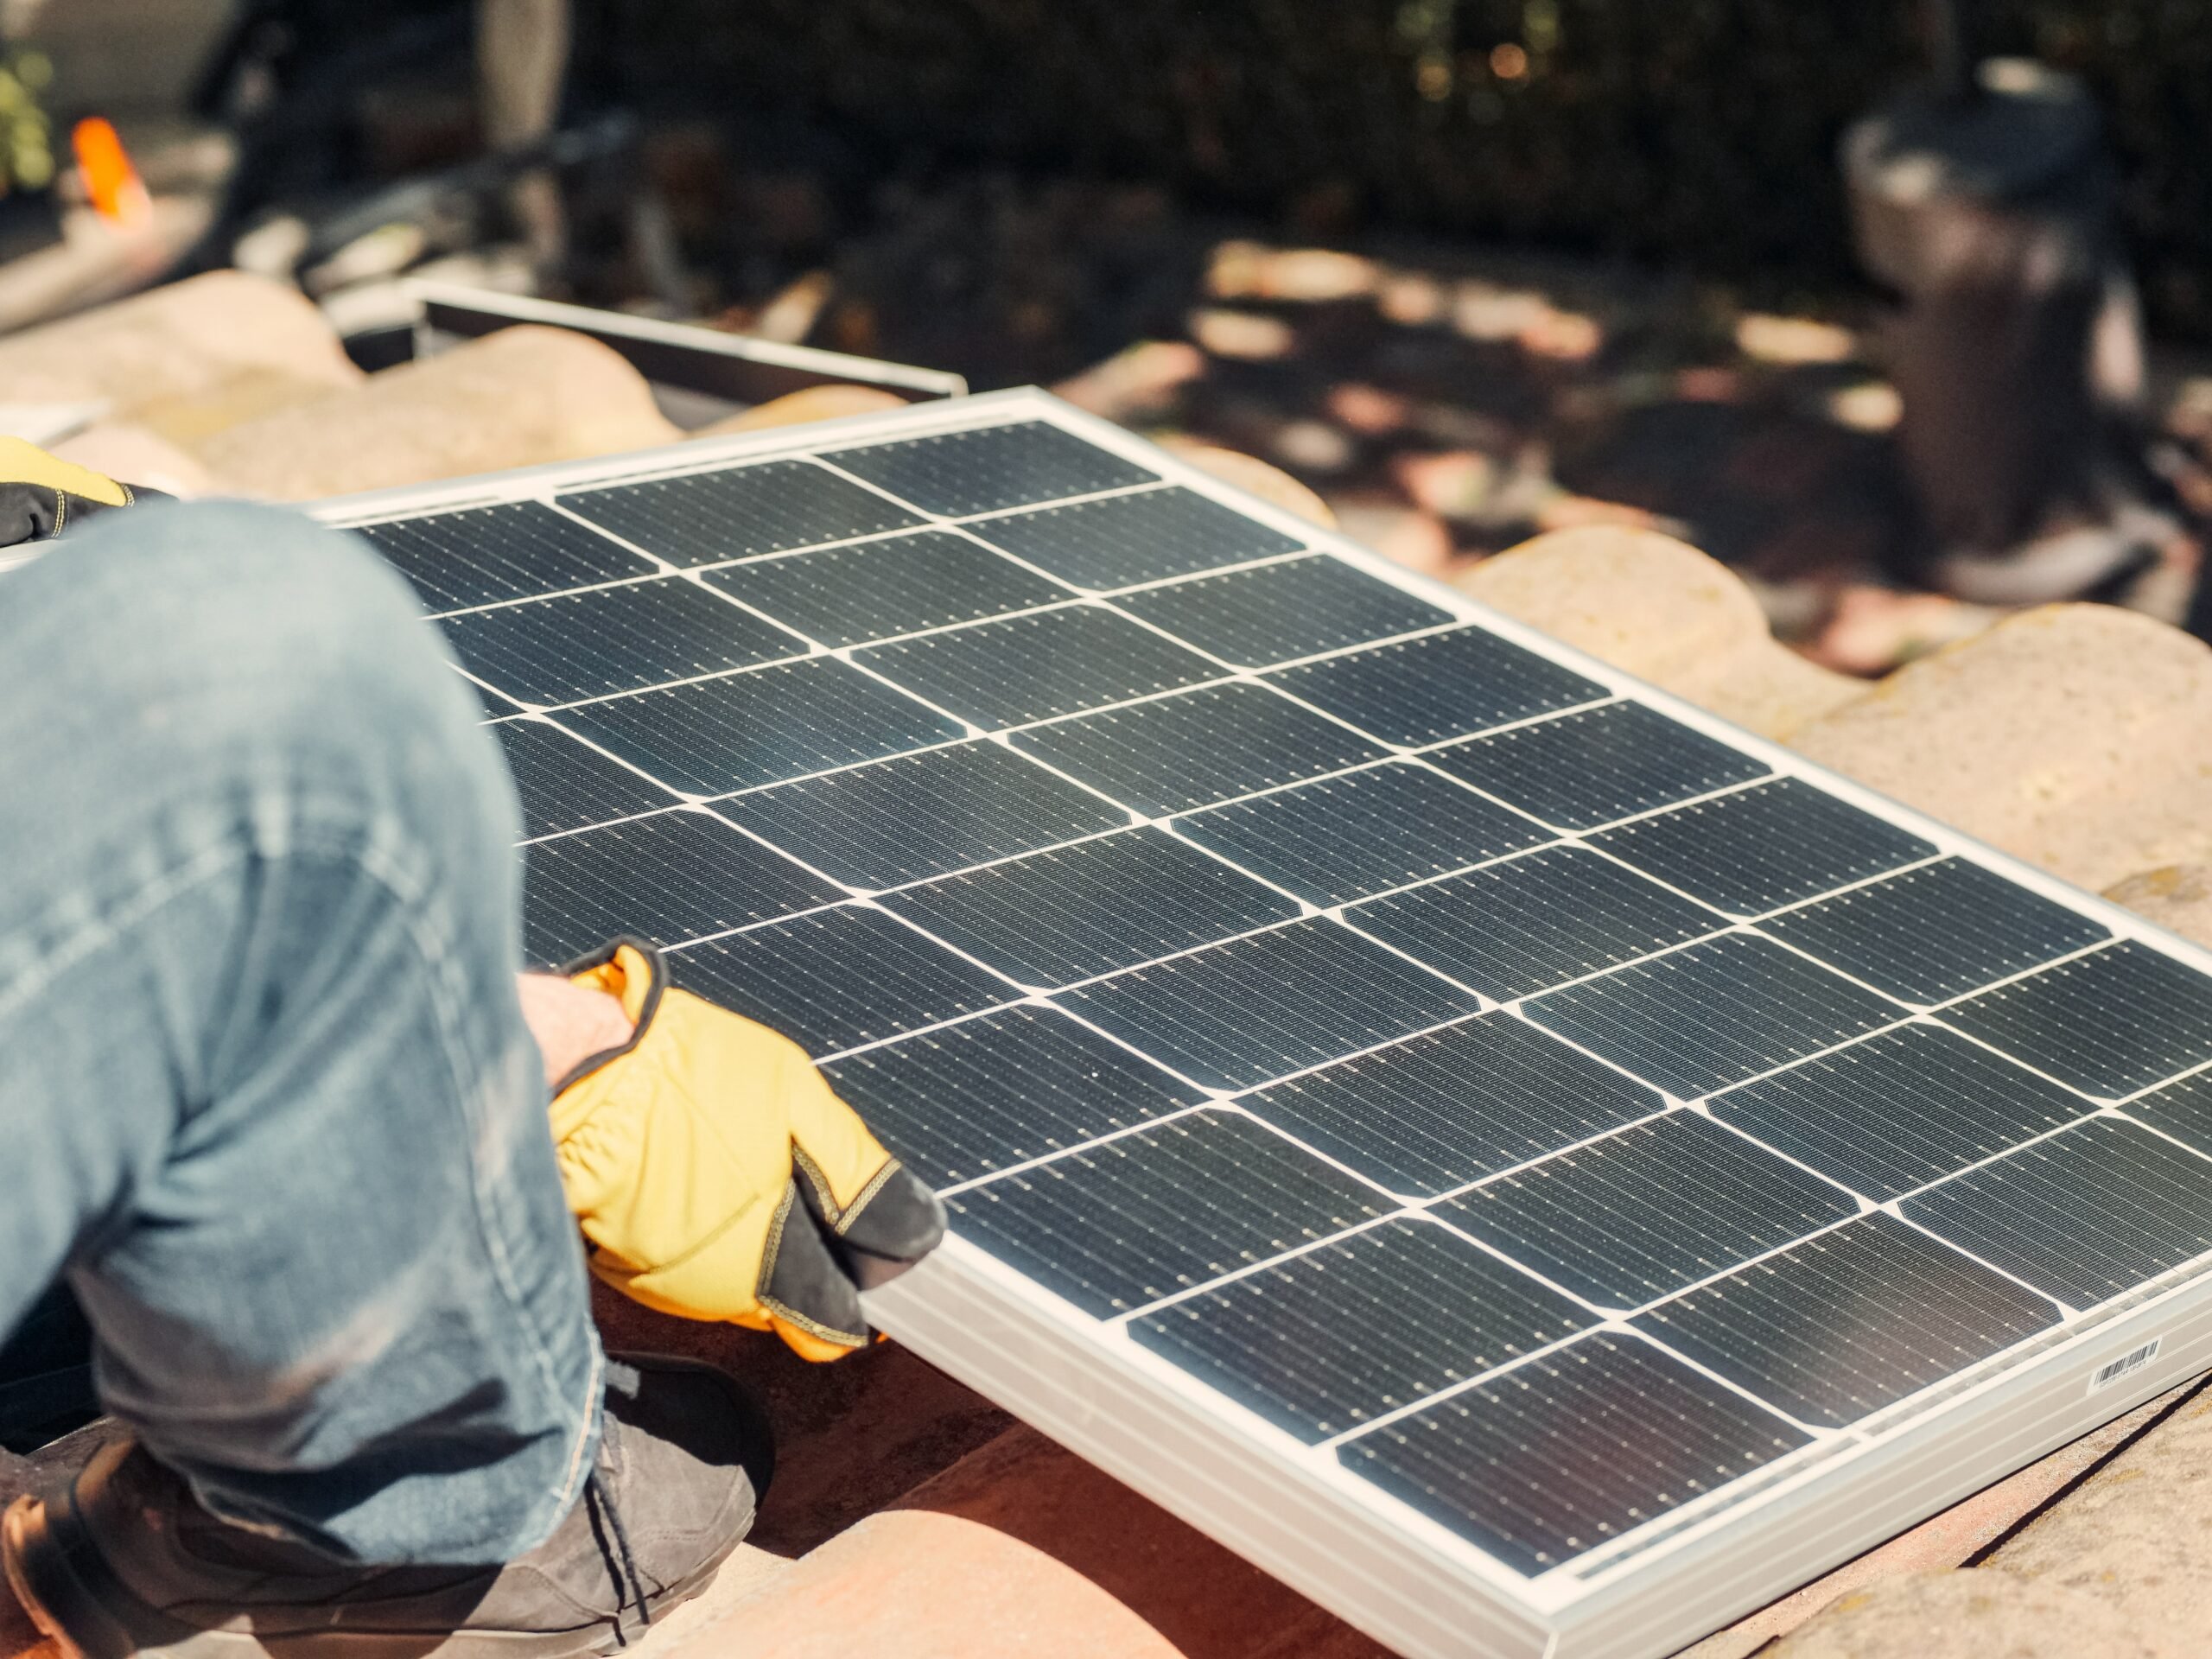 Instant plug-in solar panels as a solution to high energy bills?